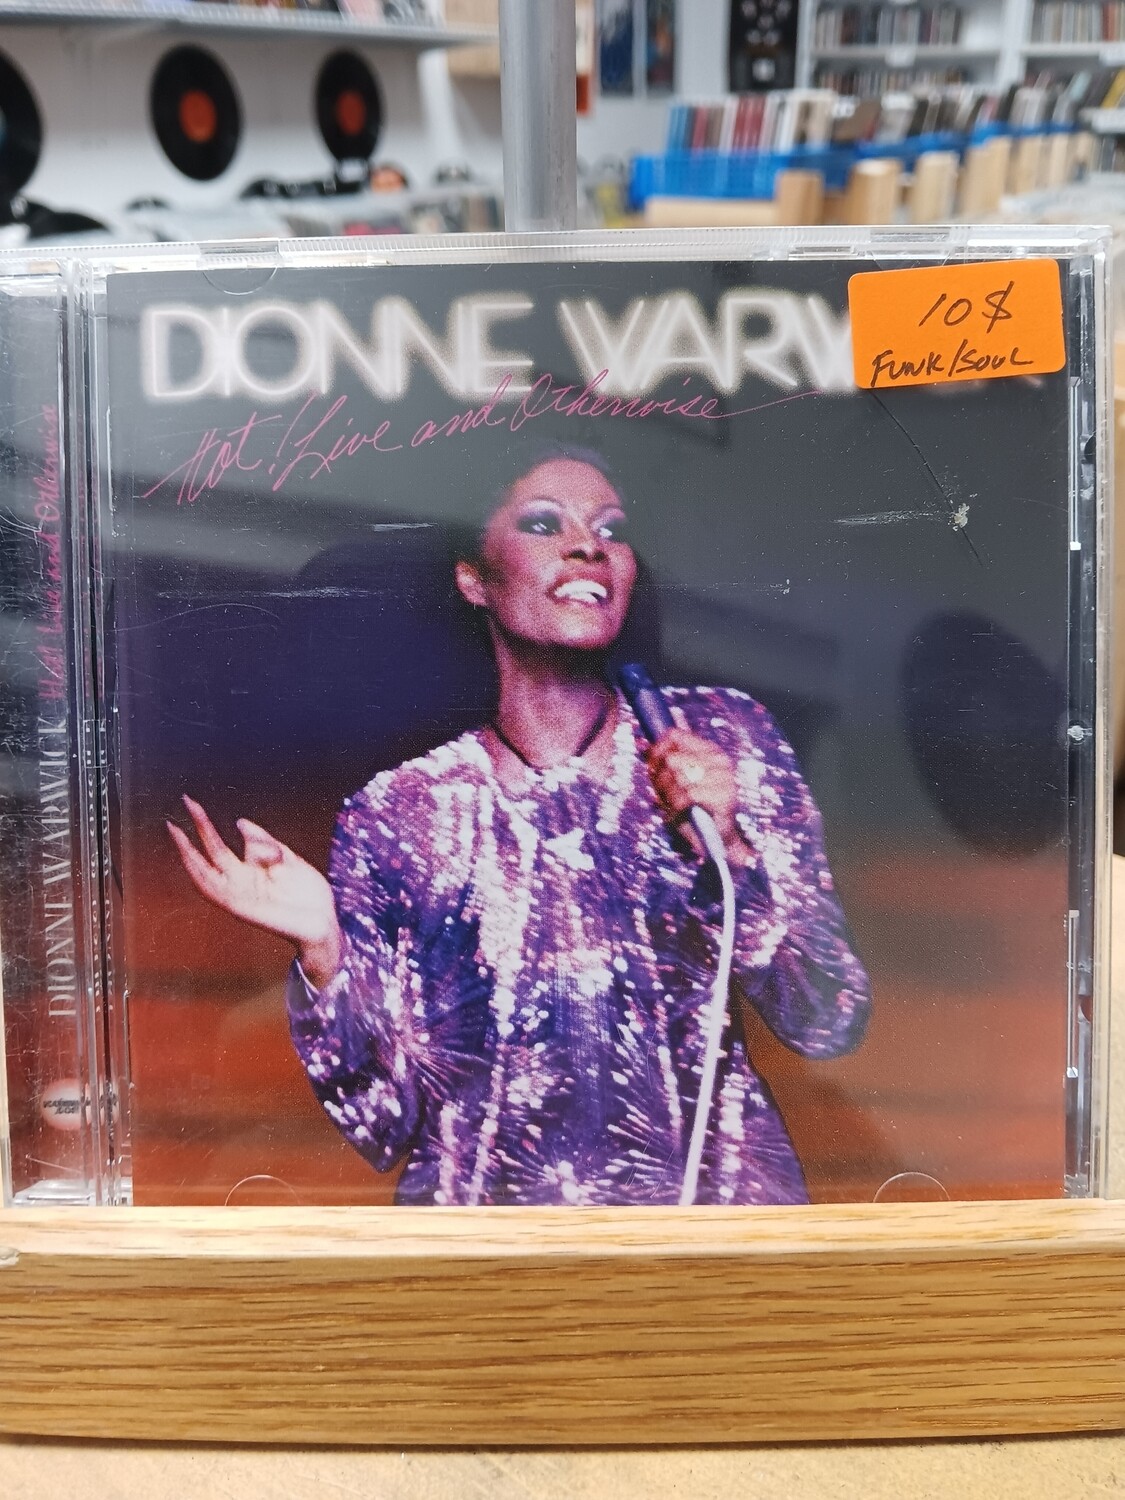 DIONNE WARWICK - Hot live and otherwise (CD)